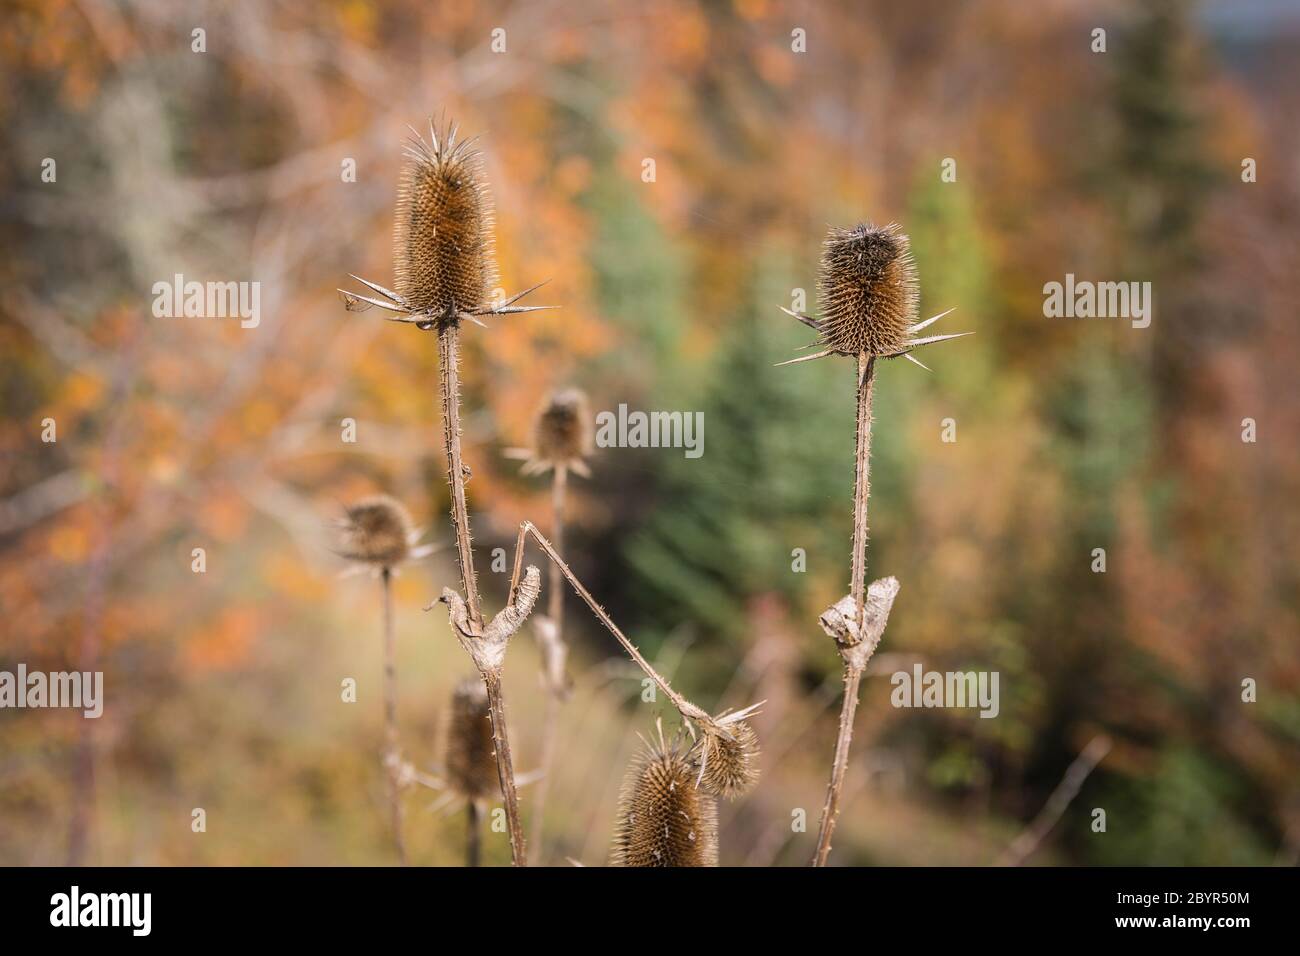 Dry thorny stems and seed heads of Common teasels (Dipsacus fullonum aka Fuller's teasel or Dipsacus sativus) with a blurred autumn background Stock Photo